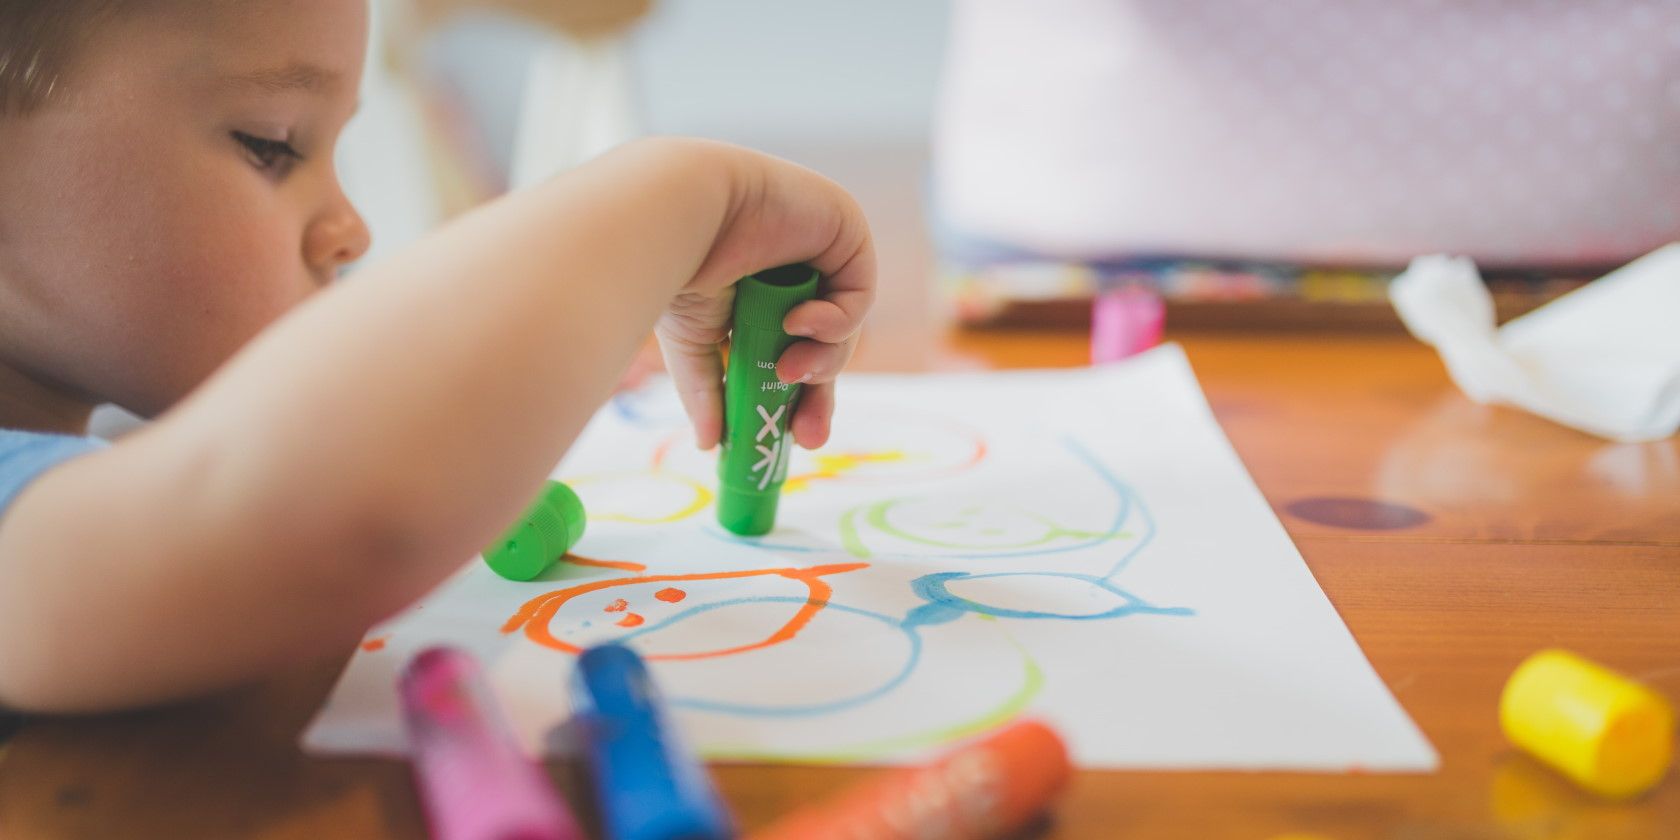 young child coloring on paper with green crayon